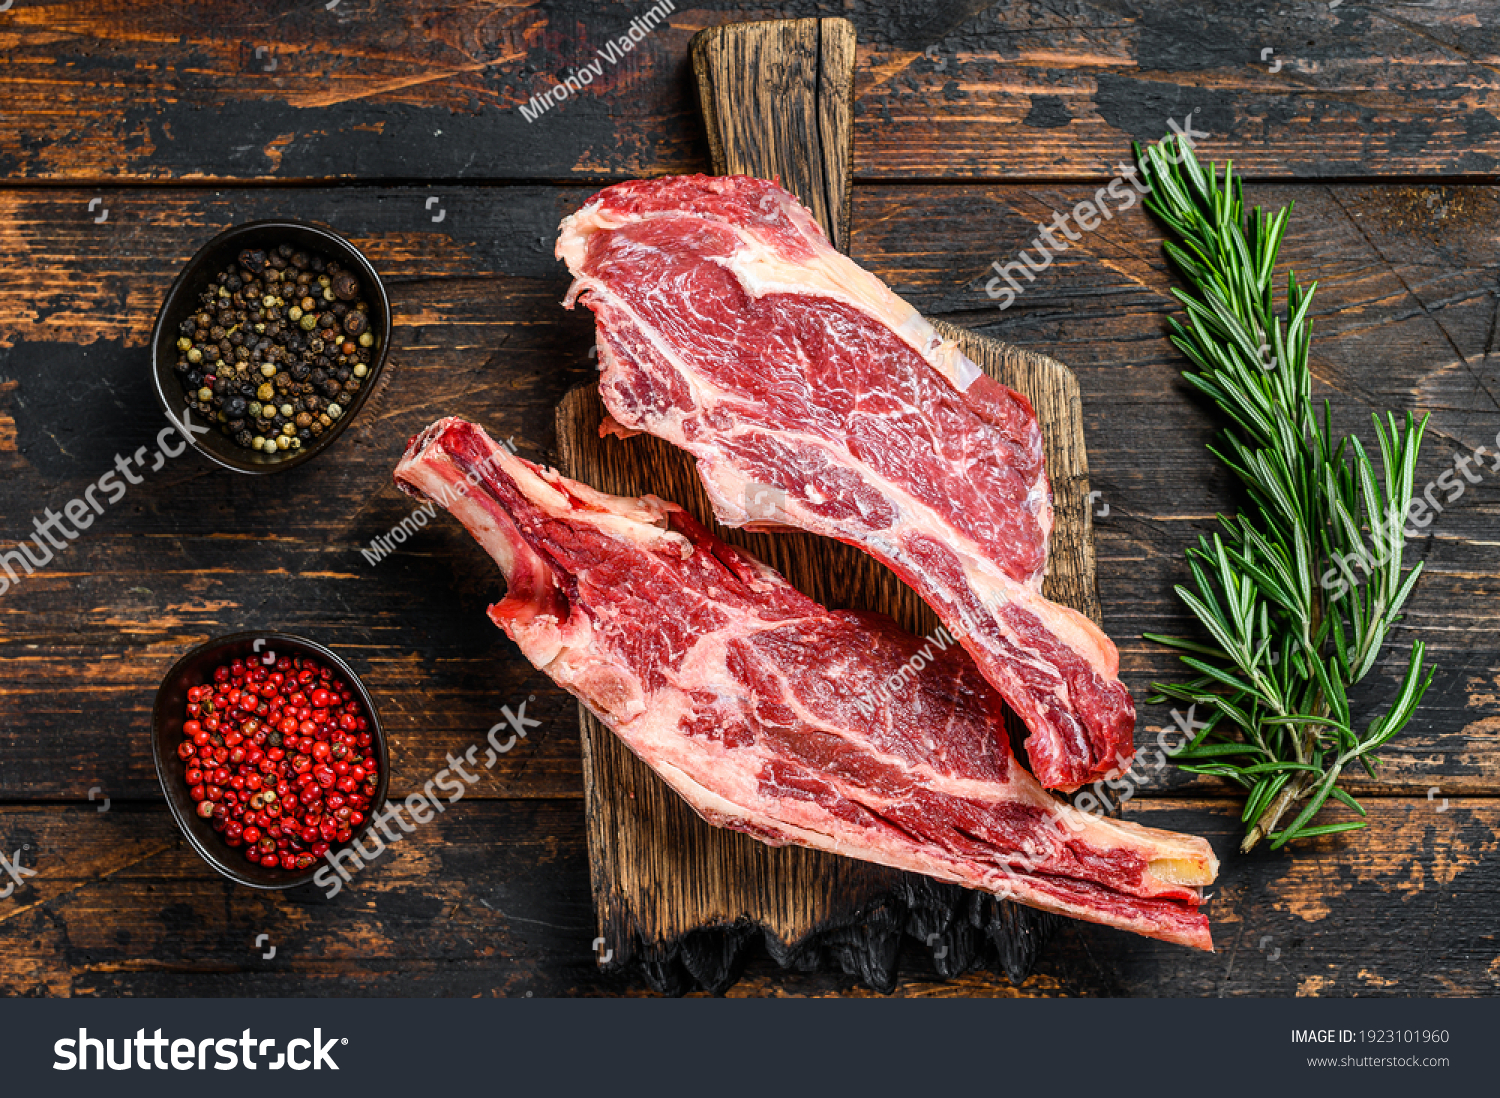 Stock Photo Fresh Cuts Of Raw Beef Meat On A Cutting Board Dark Wooden Background Top View 1923101960